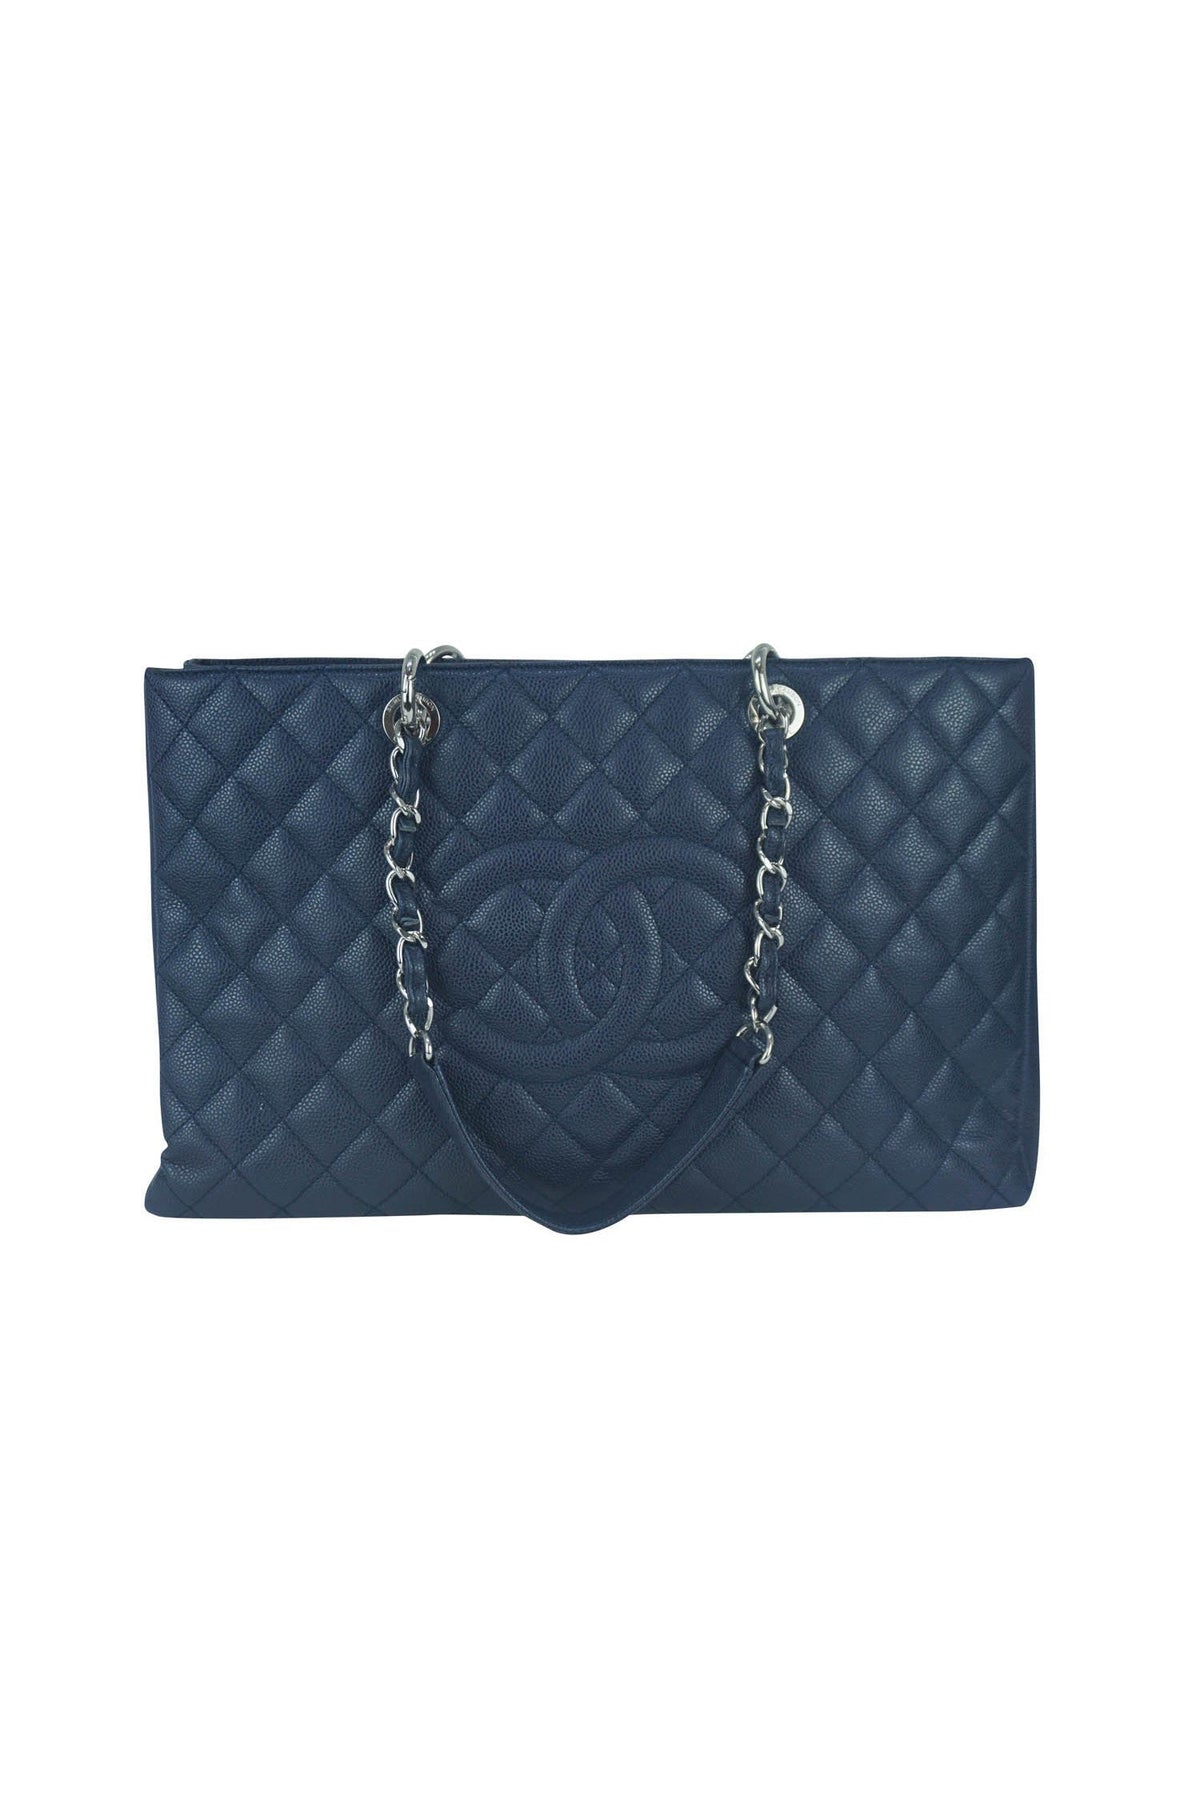 Is Chanel Discontinuing the Grand Shopping Tote? - PurseBlog